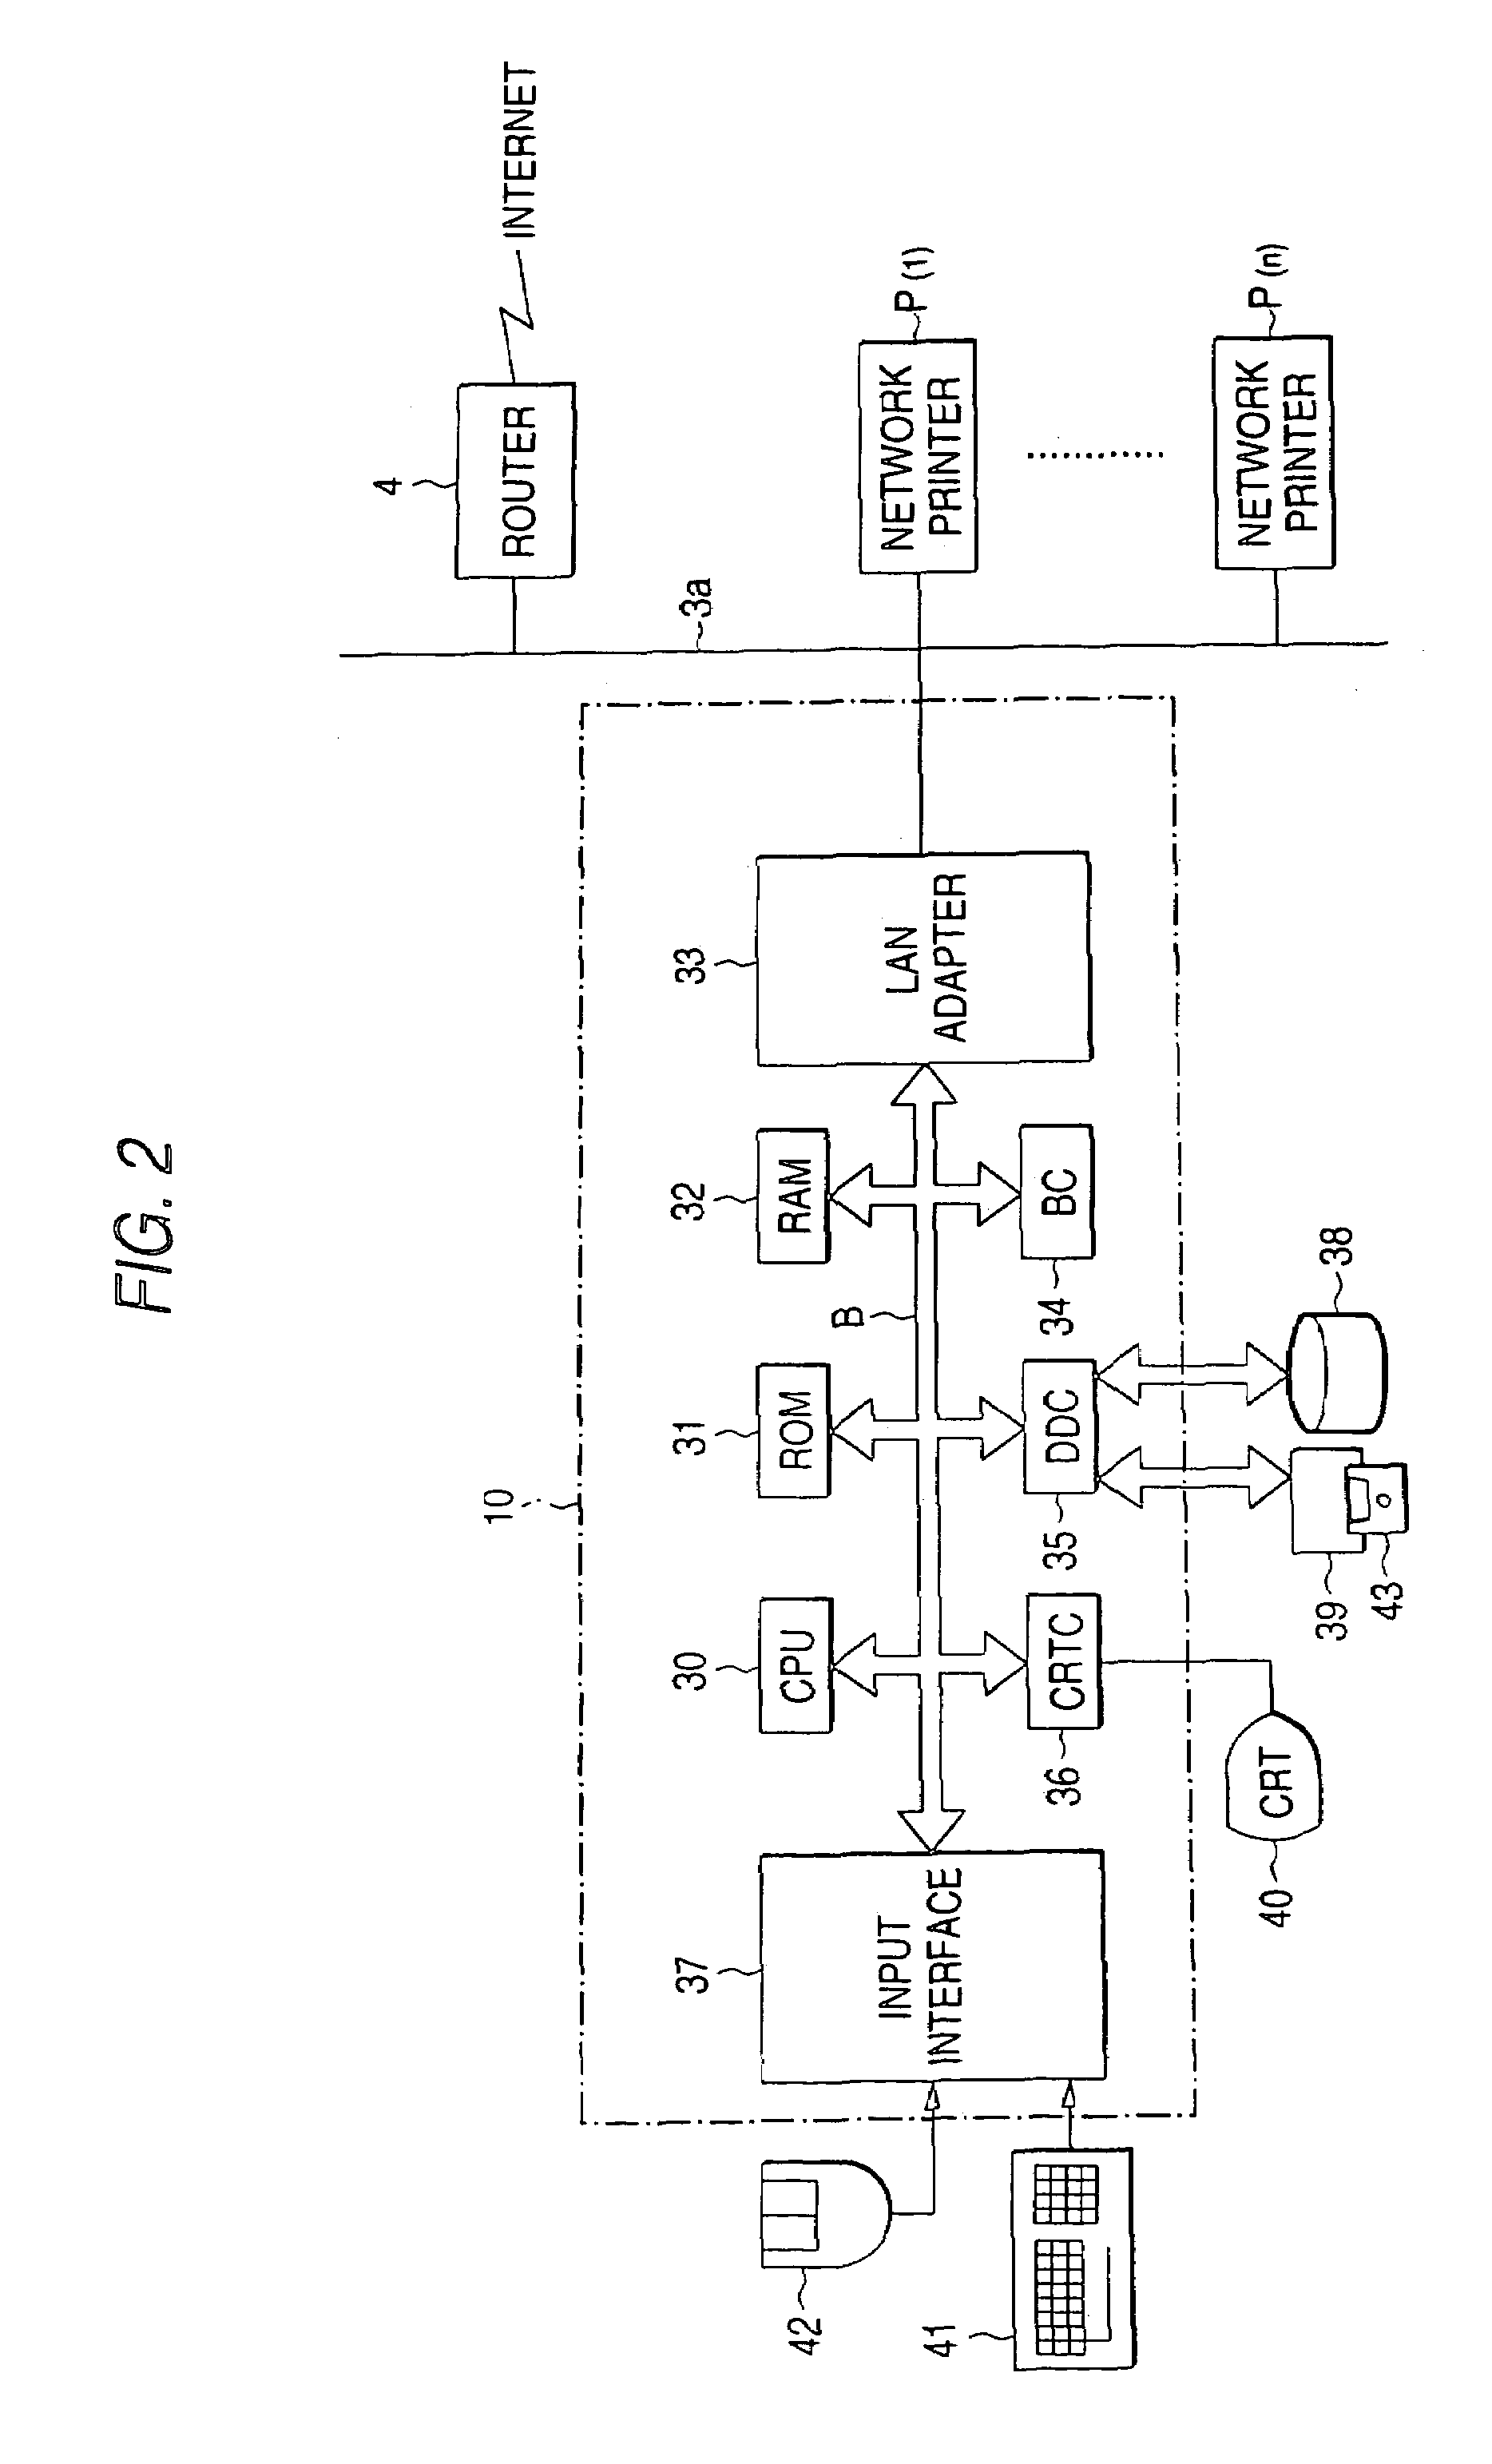 System and method for monitoring the state of a plurality of machines connected via a computer network